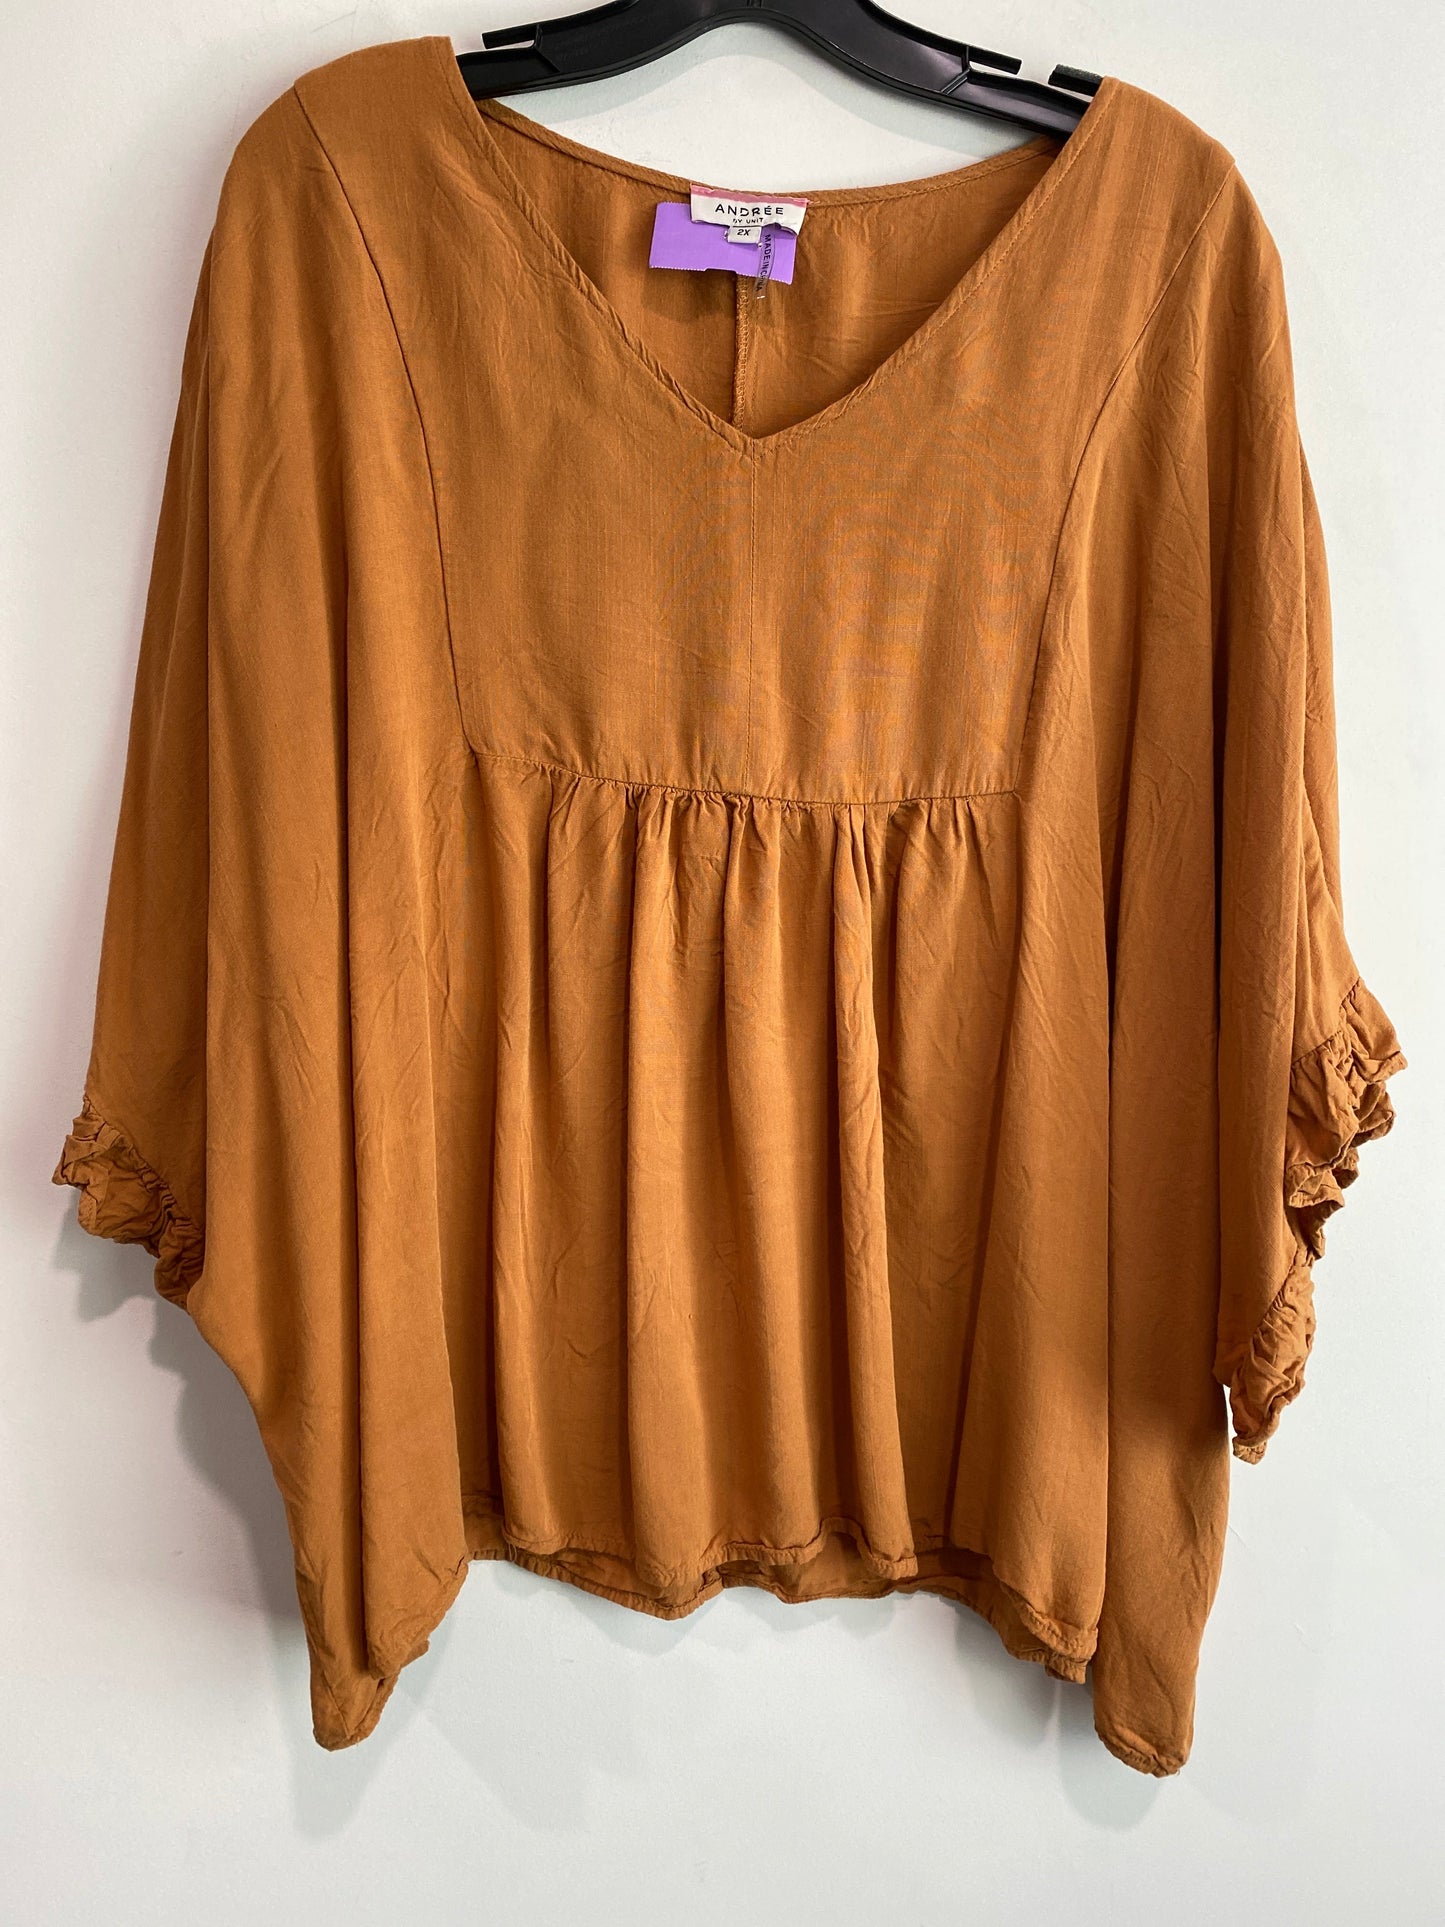 Brown Top Short Sleeve Andree By Unit, Size 2x